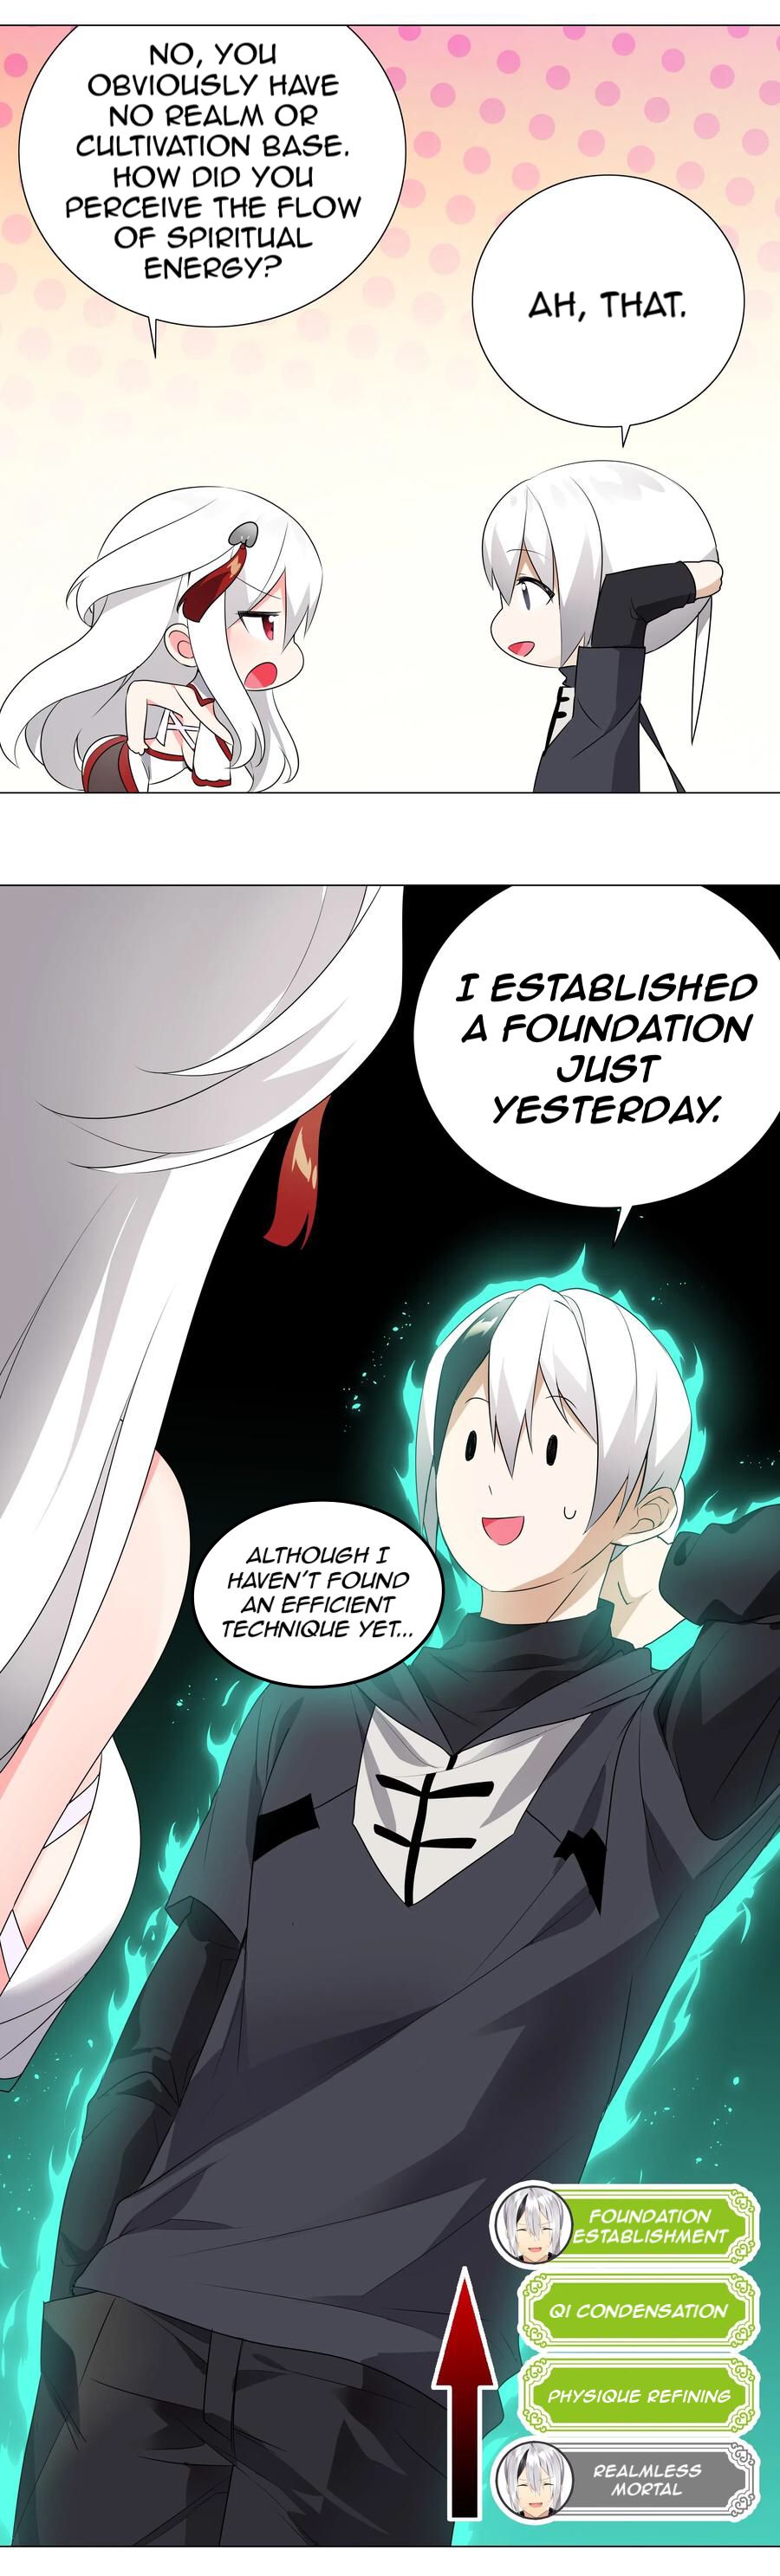 My Harem Grew So Large, I Was Forced To Ascend - chapter 8 - #2